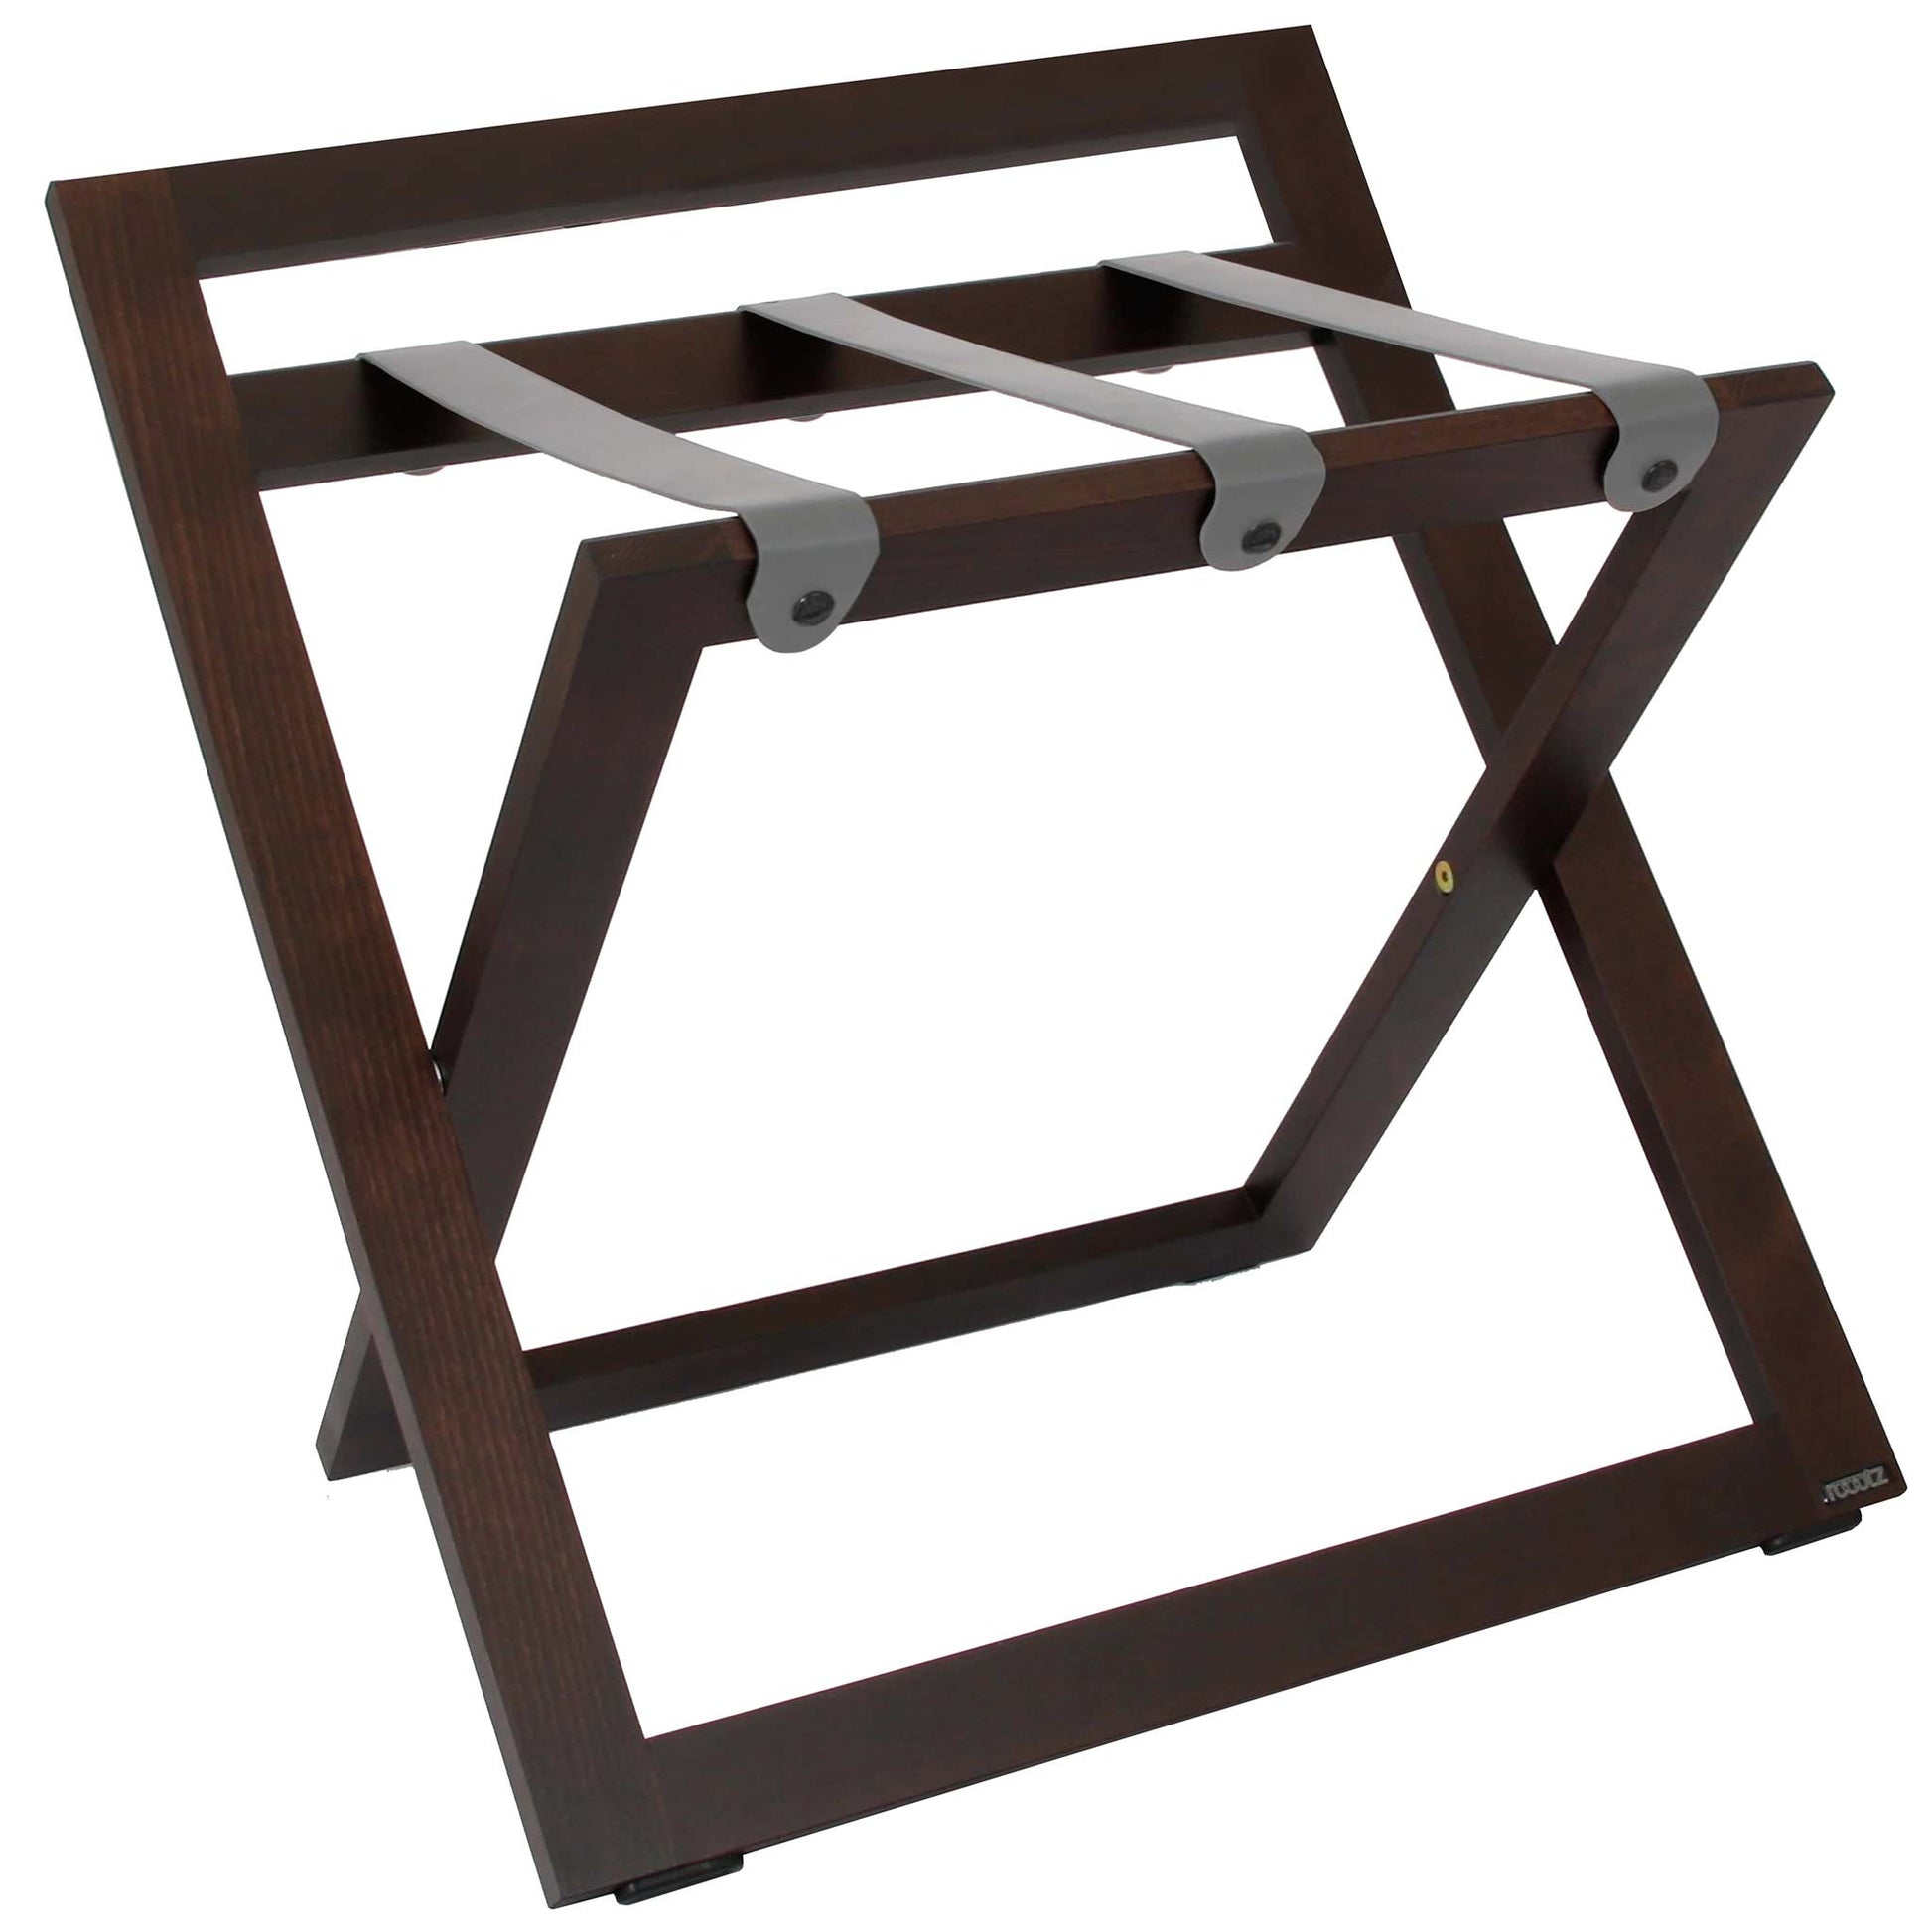 Roootz compact walnut wooden hotel luggage rack with grey leather straps and backstand